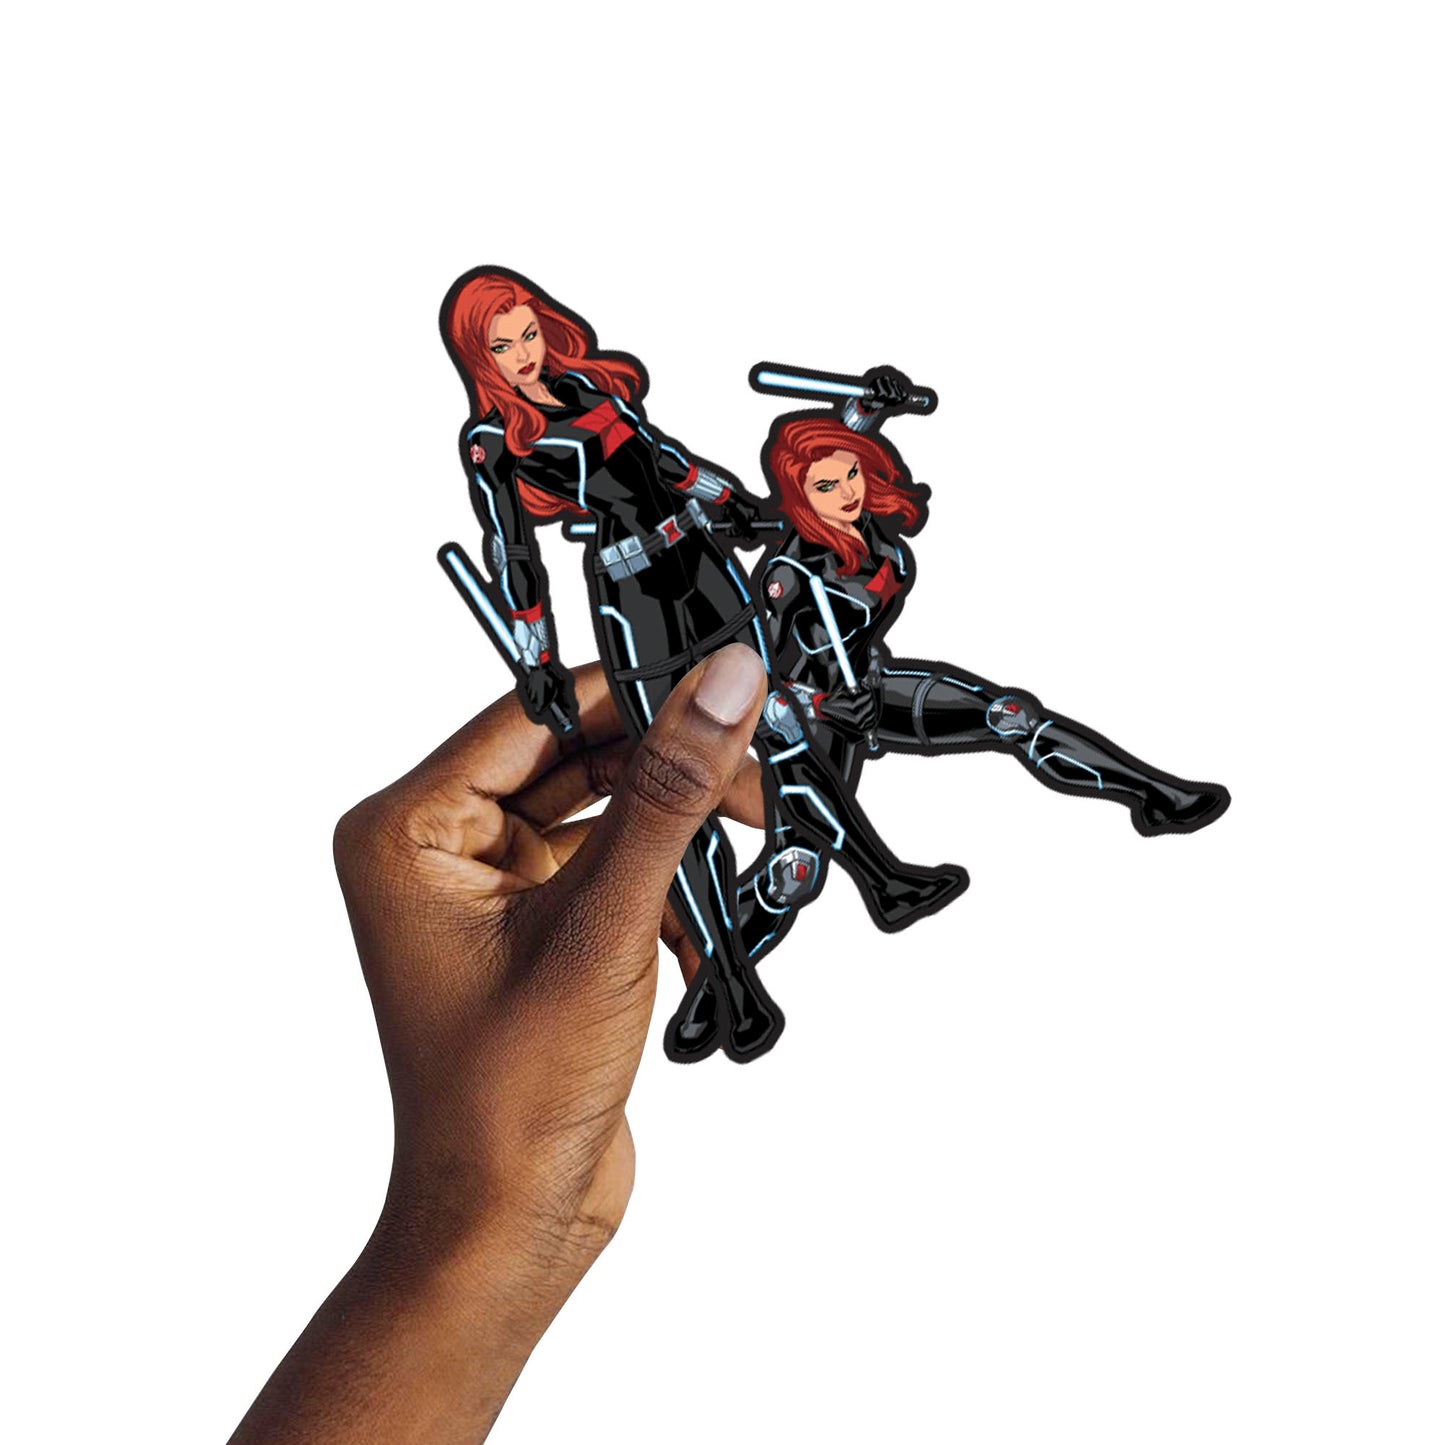 Sheet of 5 -Avengers: BLACK WIDOW Minis        - Officially Licensed Marvel Removable    Adhesive Decal